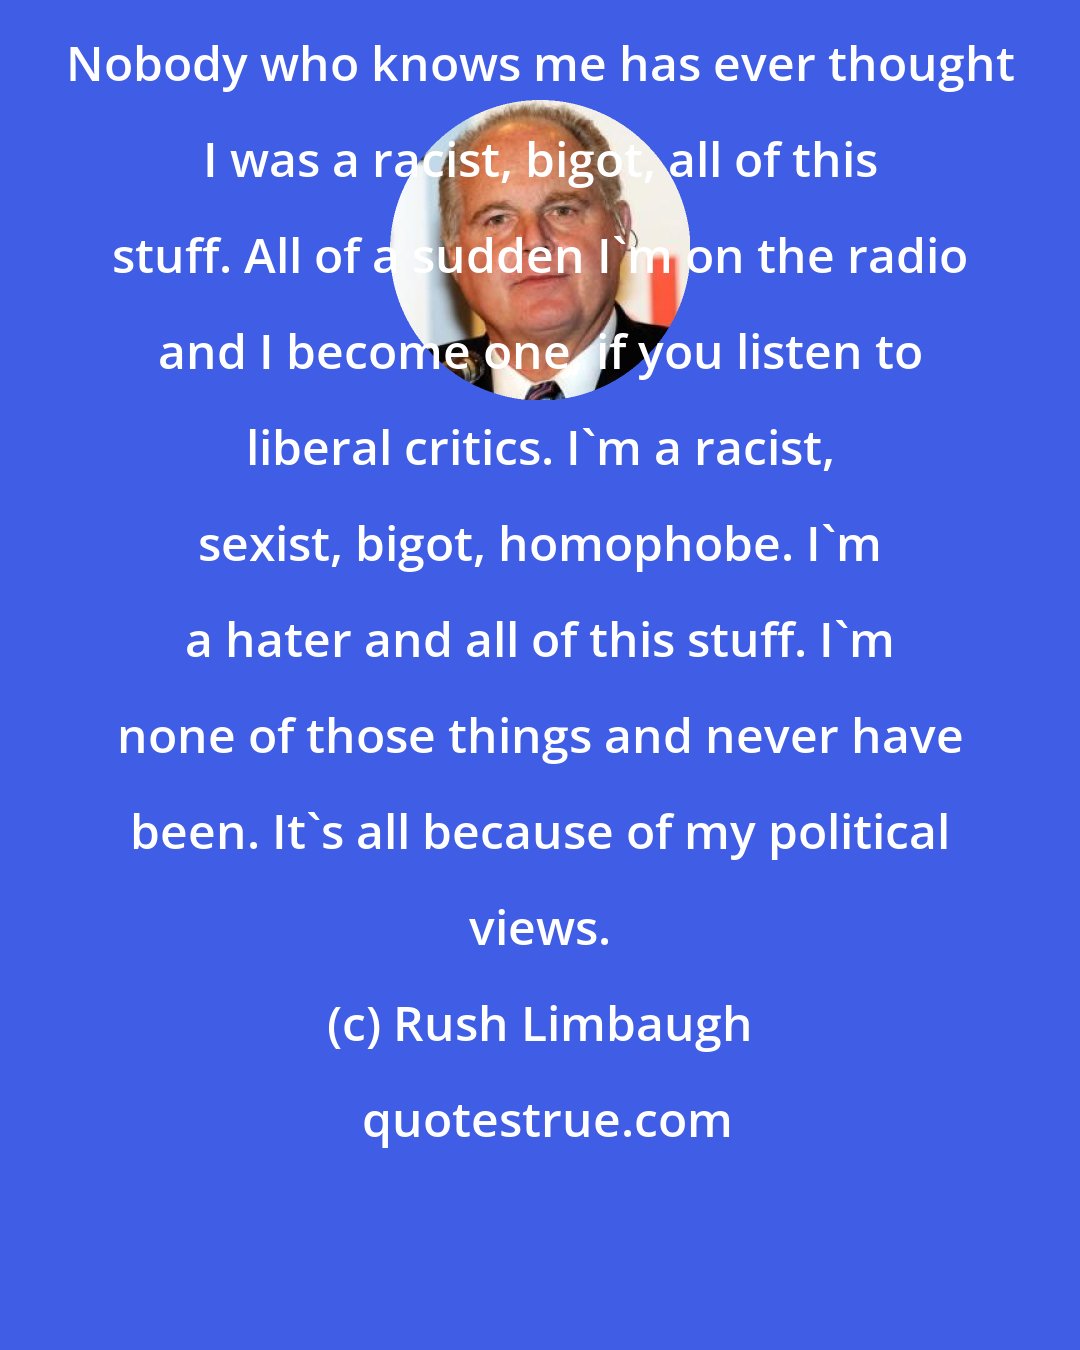 Rush Limbaugh: Nobody who knows me has ever thought I was a racist, bigot, all of this stuff. All of a sudden I'm on the radio and I become one, if you listen to liberal critics. I'm a racist, sexist, bigot, homophobe. I'm a hater and all of this stuff. I'm none of those things and never have been. It's all because of my political views.